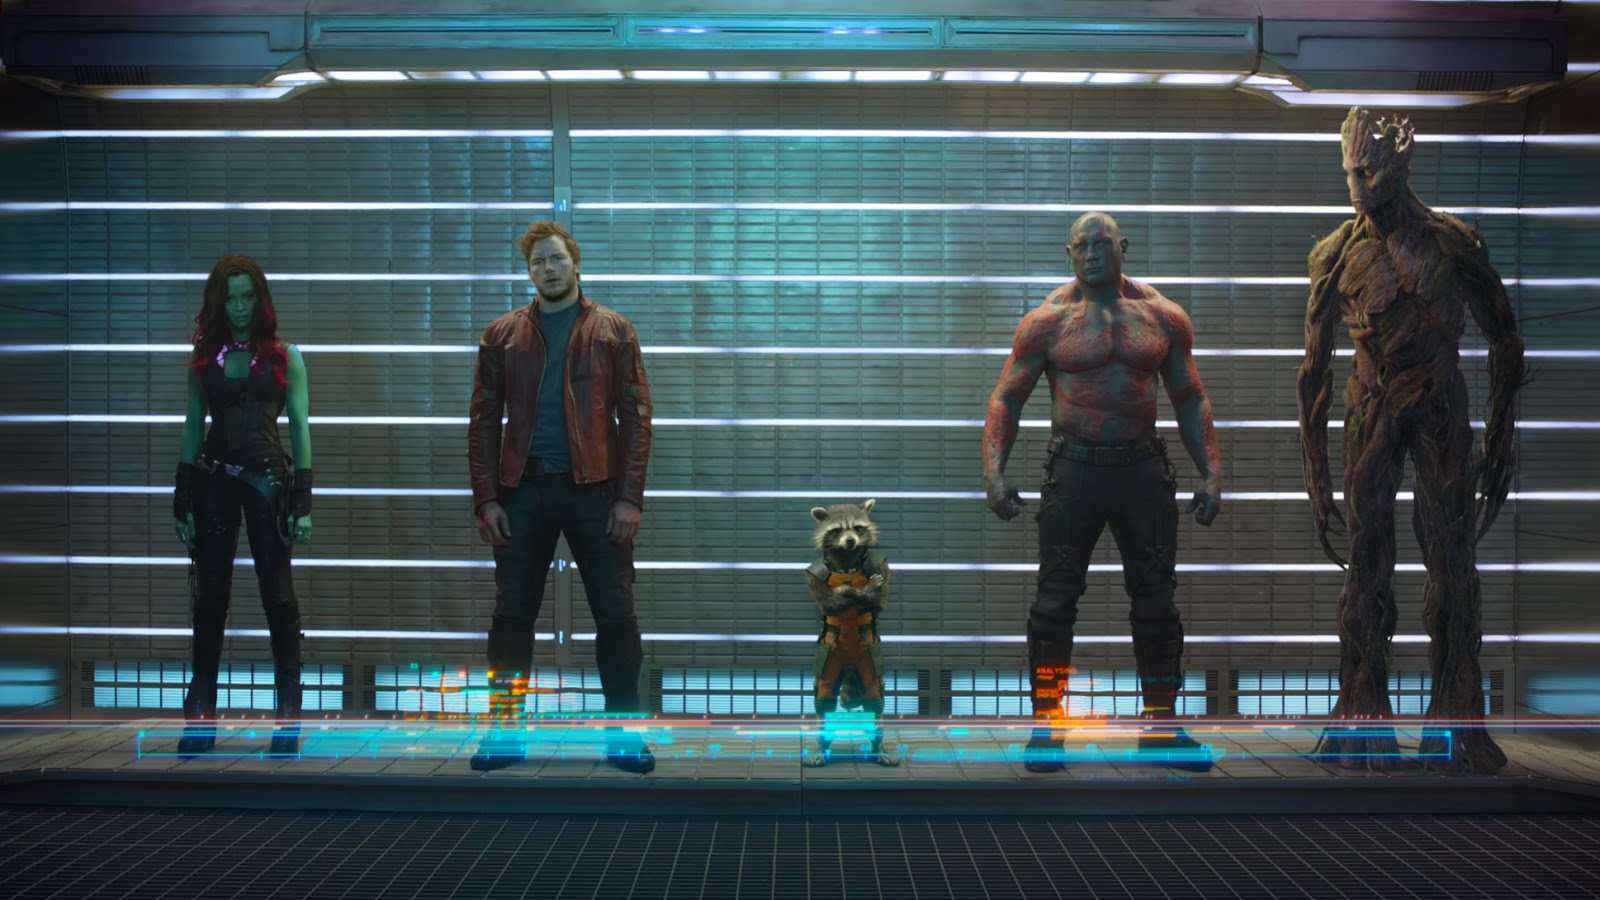 The Guardians of the Galaxy:  Gamora, Star Lord, Rocket Racoon, Drax the Destroyer, and Groot